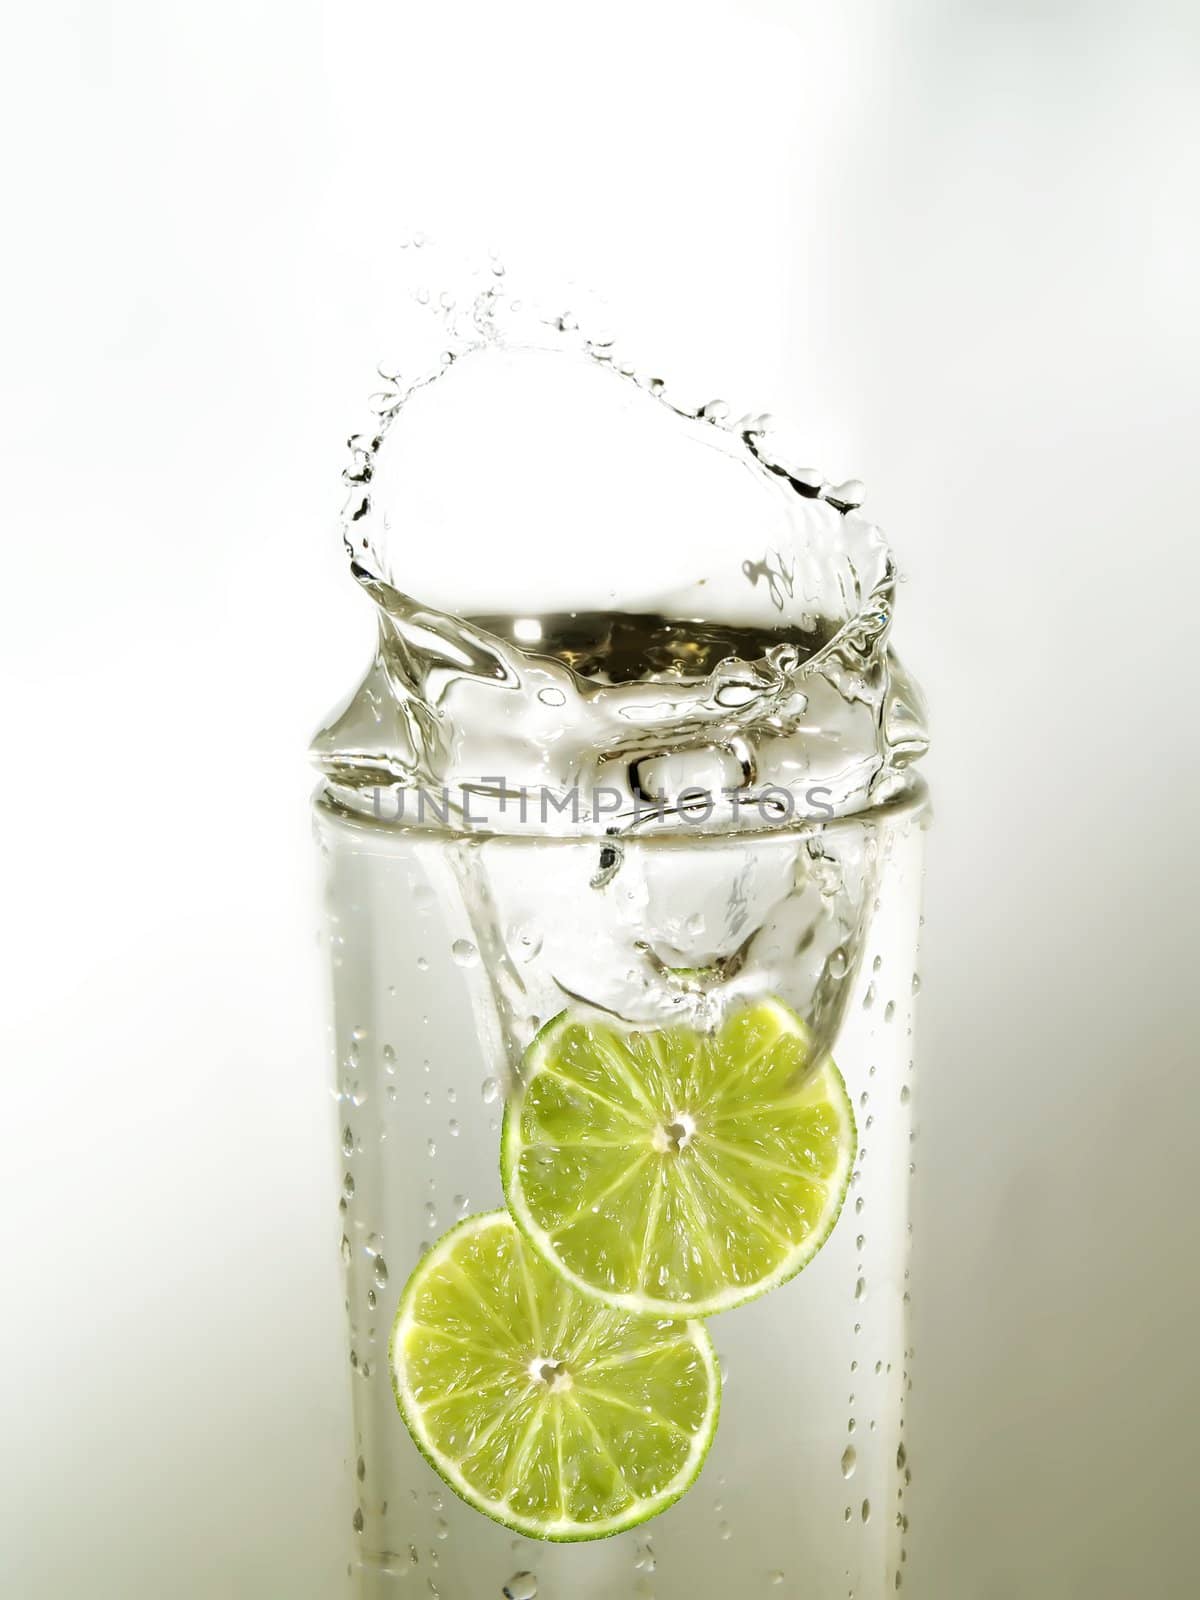 Lime slices in water by henrischmit